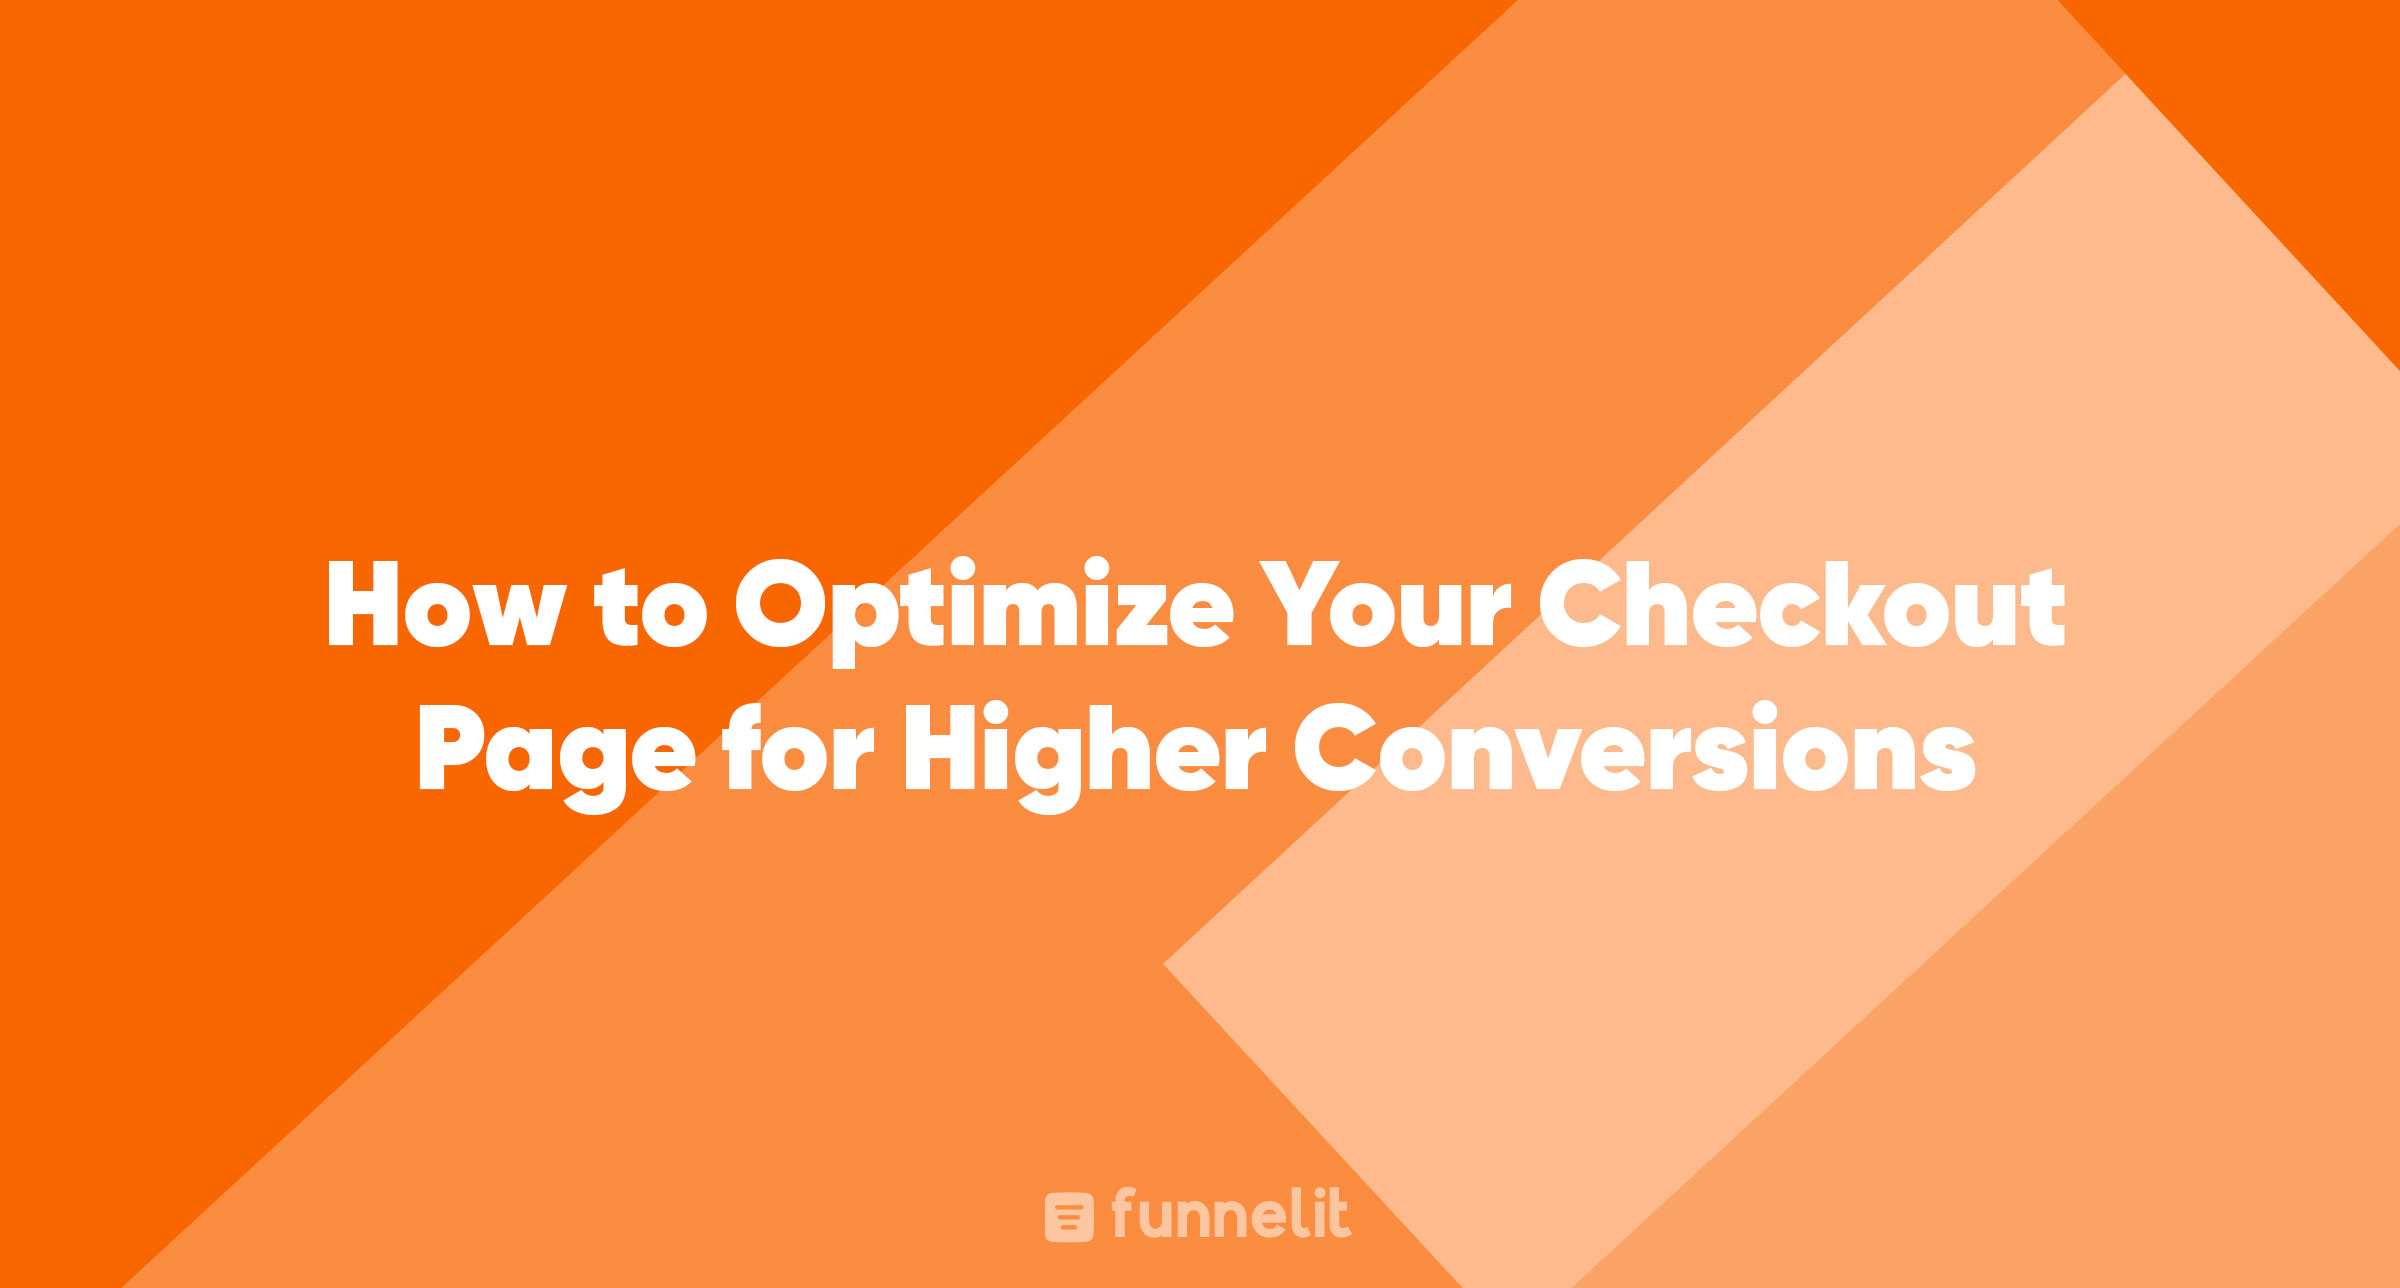 Article | How to Optimize Your Checkout Page for Higher Conversions